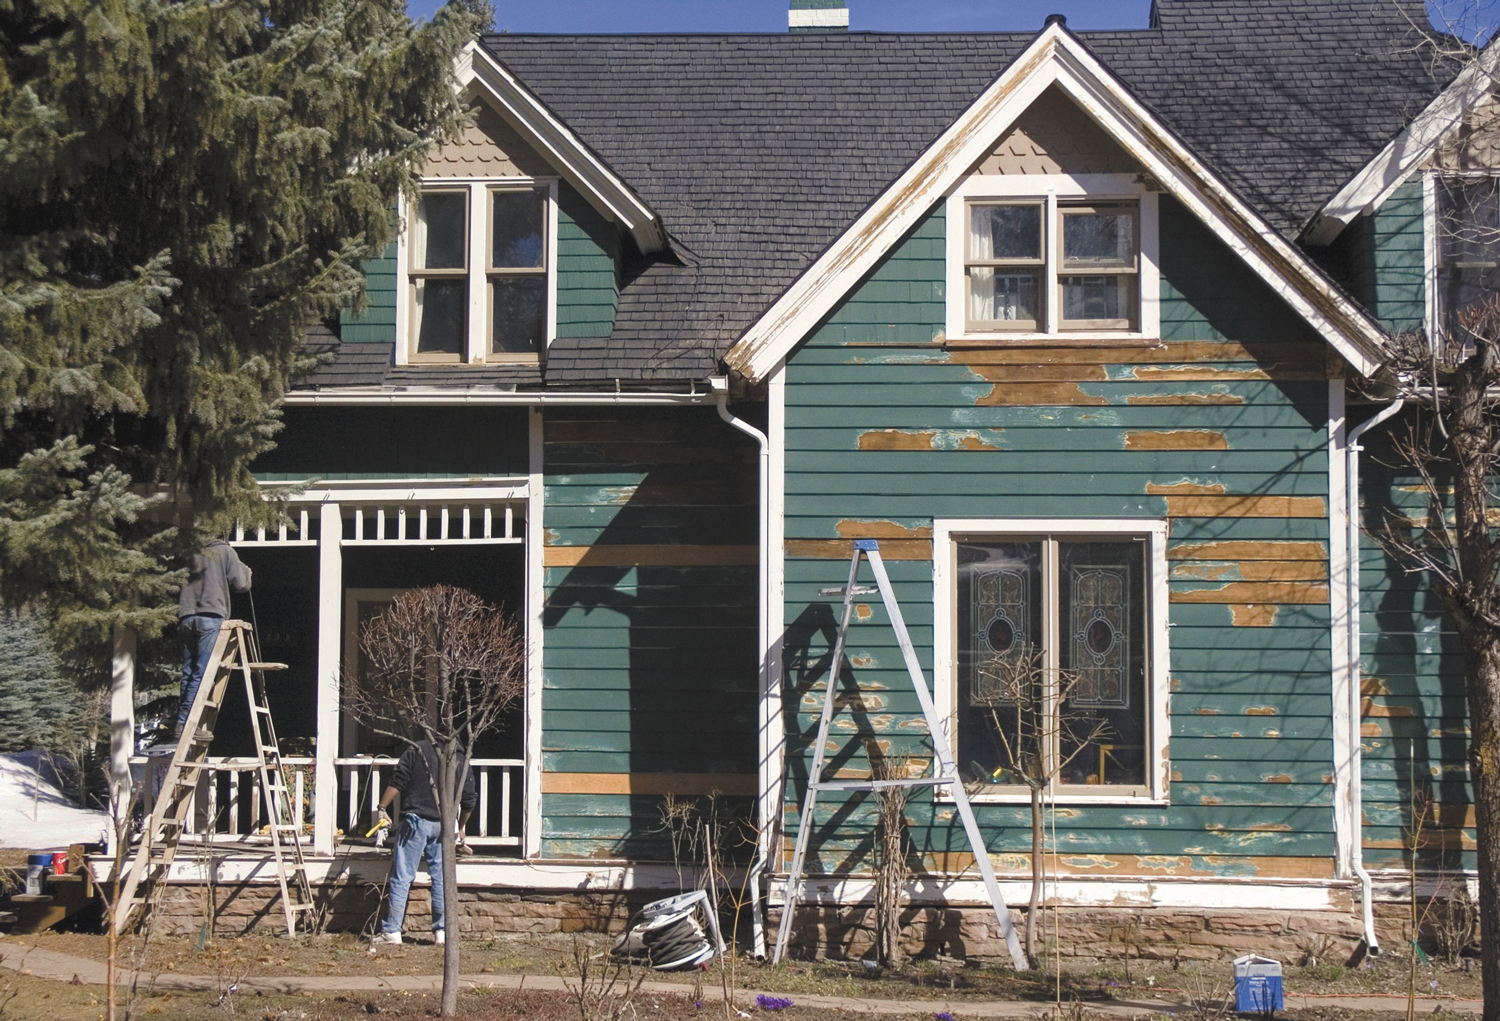 If you own a classic old home, you'll learn they're considerably more challenging to renovate - but the journey is worth it